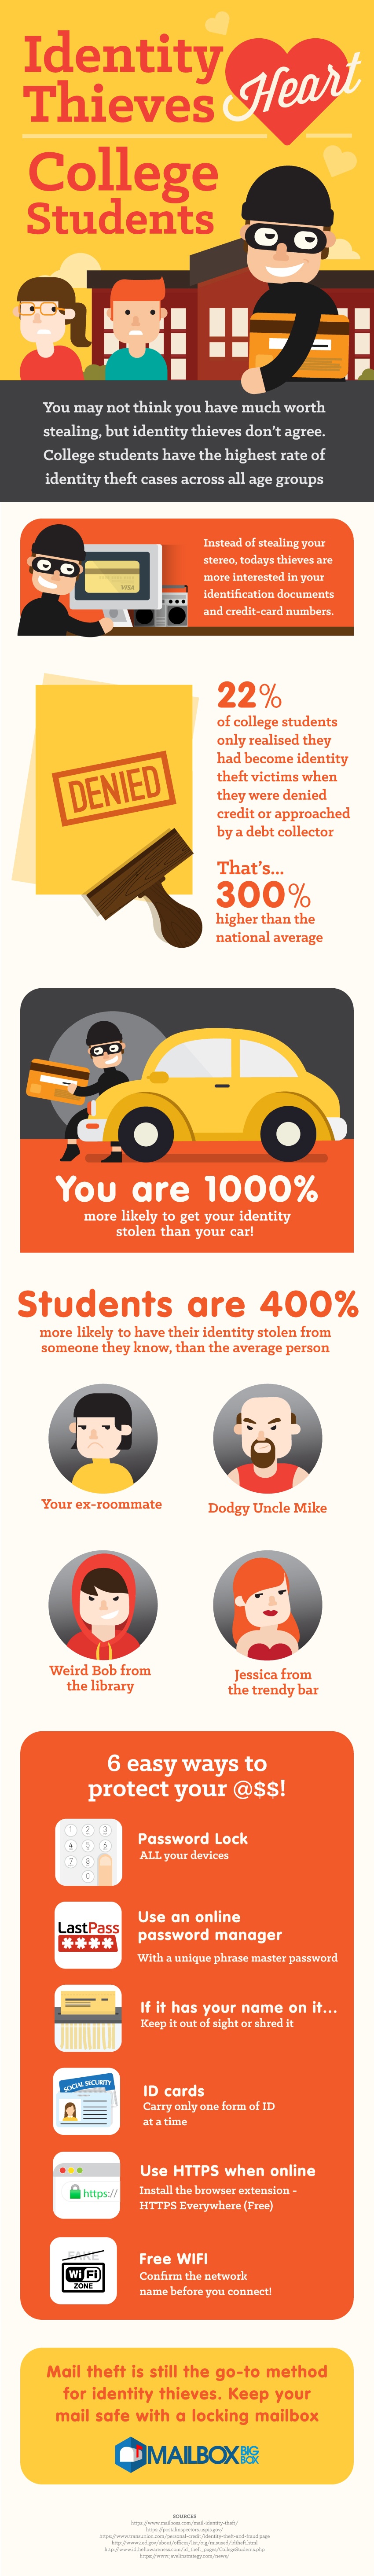 Identity Thieves Heart College Students Infographic